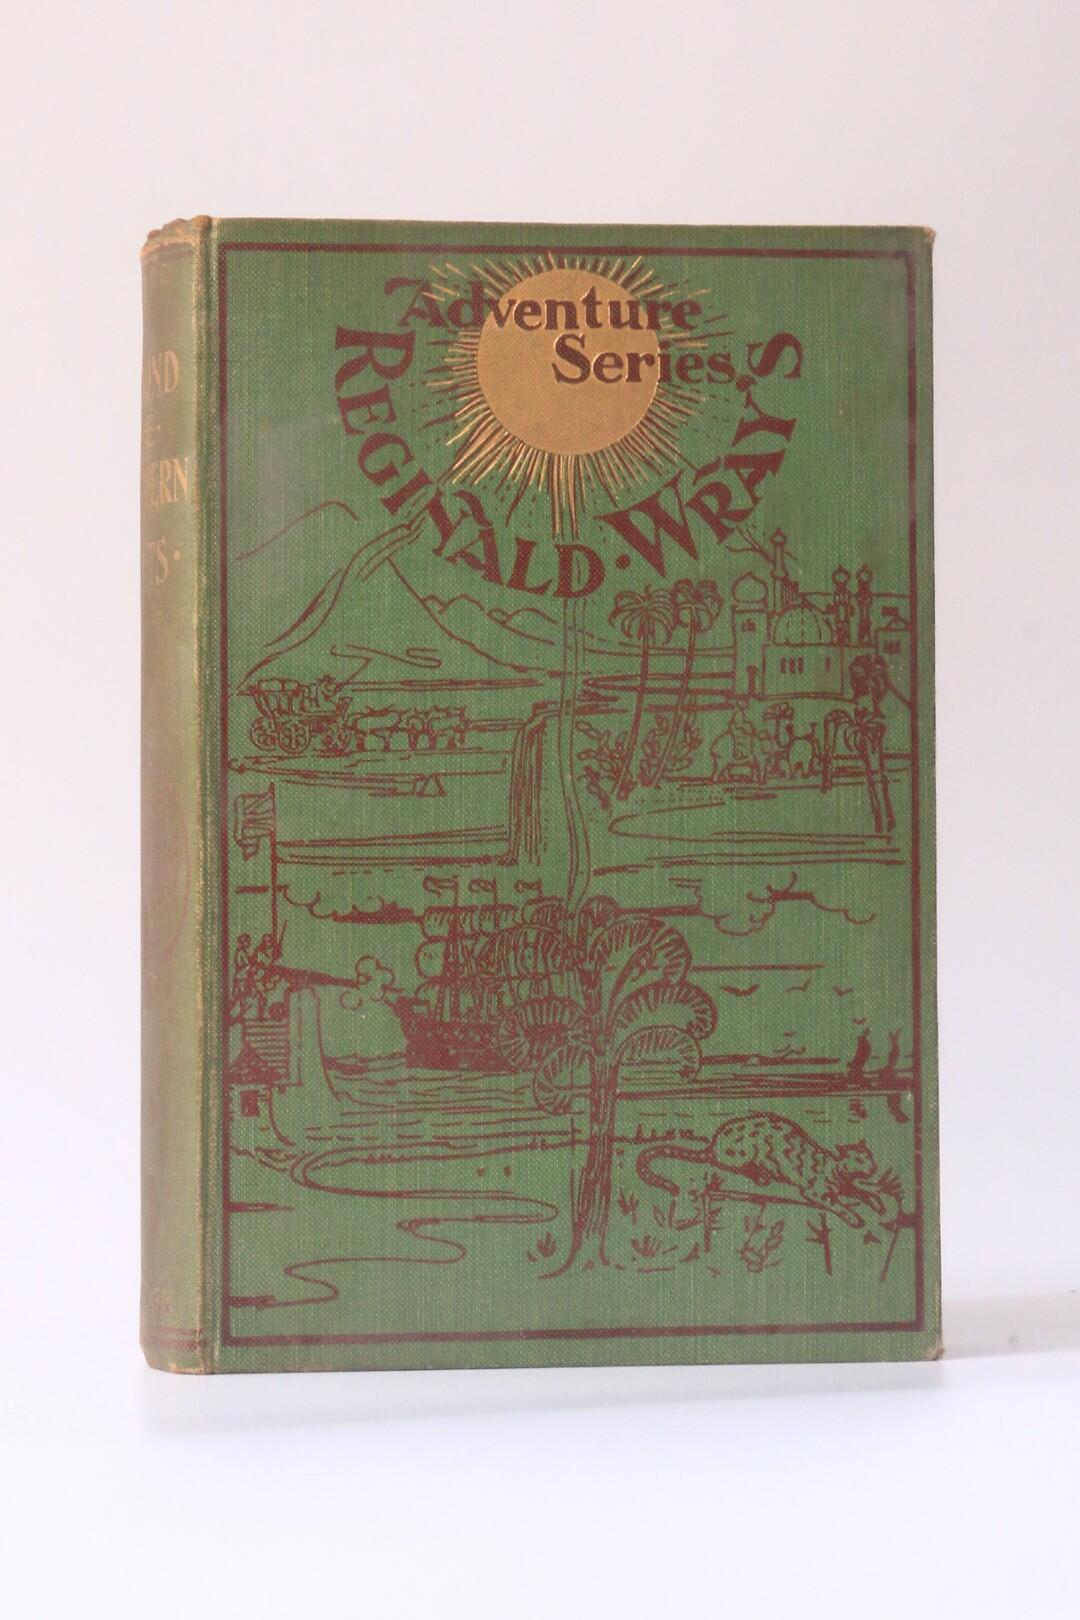 Reginald Wray [William Home-Gall] - Beyond the Northern Lights: A Tale of Strange Adventure in Unknown Seas - Thomas Burleigh, 1903, Signed First Edition.